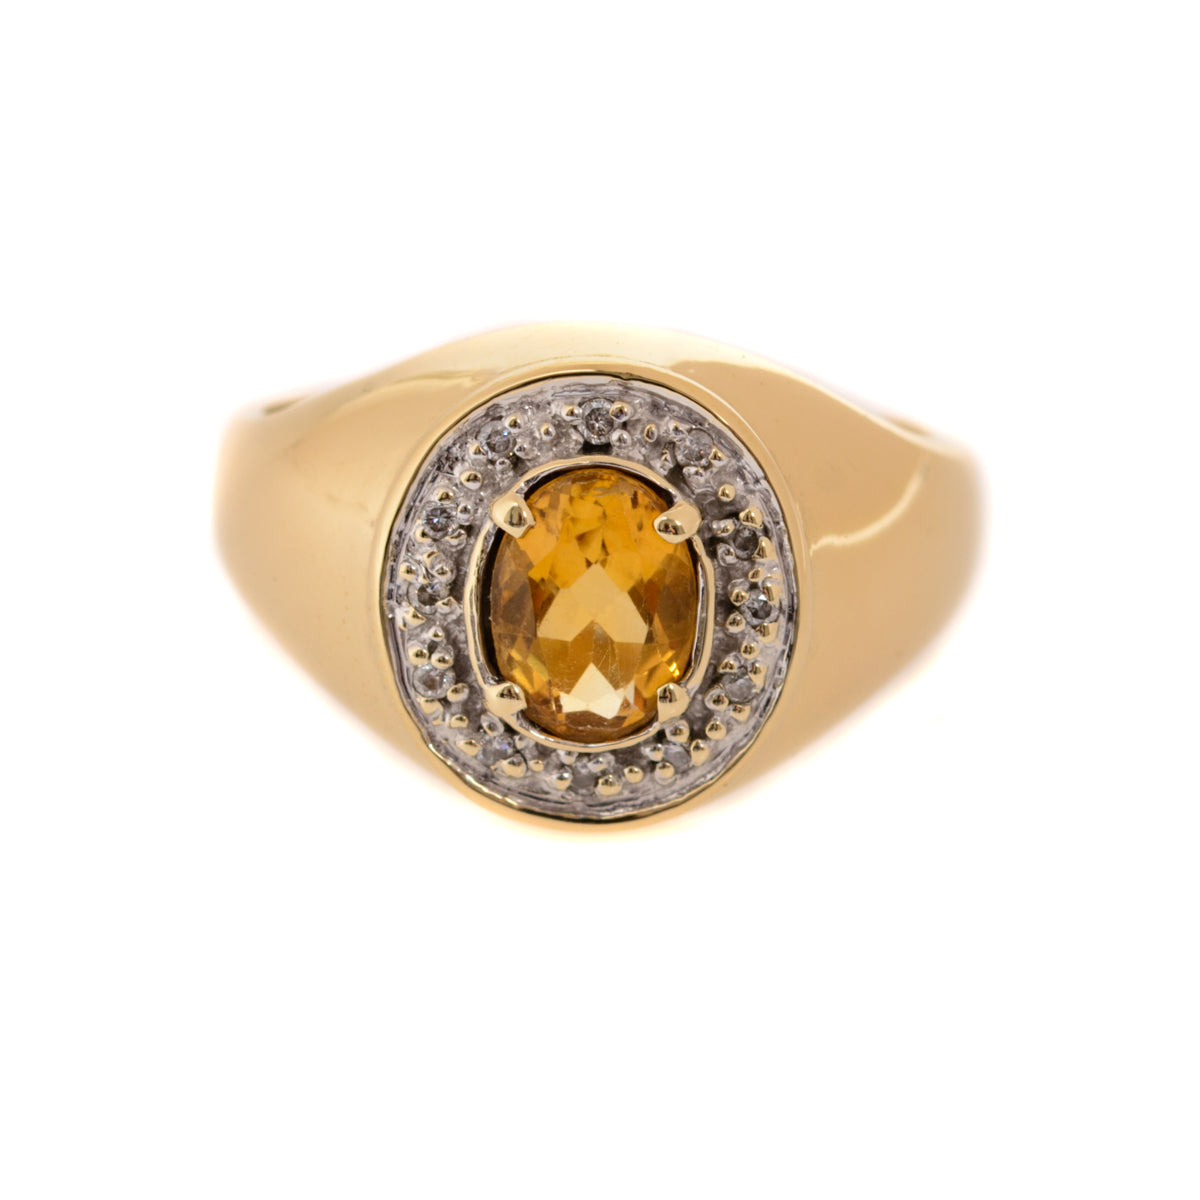 9ct Gold & Citrine Ring With Diamond Halo & Wide Shoulders London 2001 UK Size S (A1271)